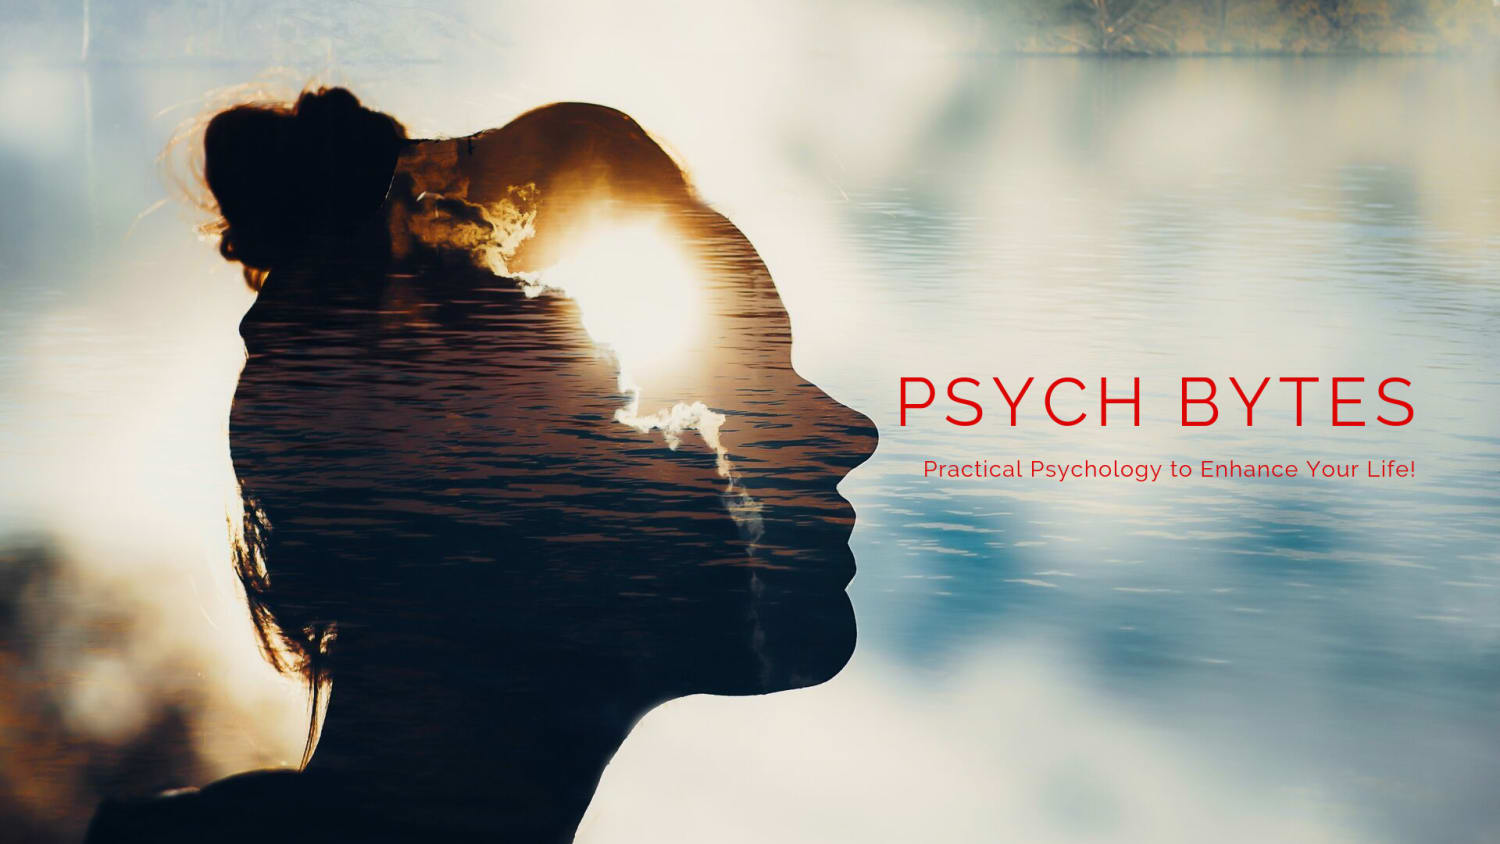 Practical Psychology and Mental Health Tips to Enhance Life